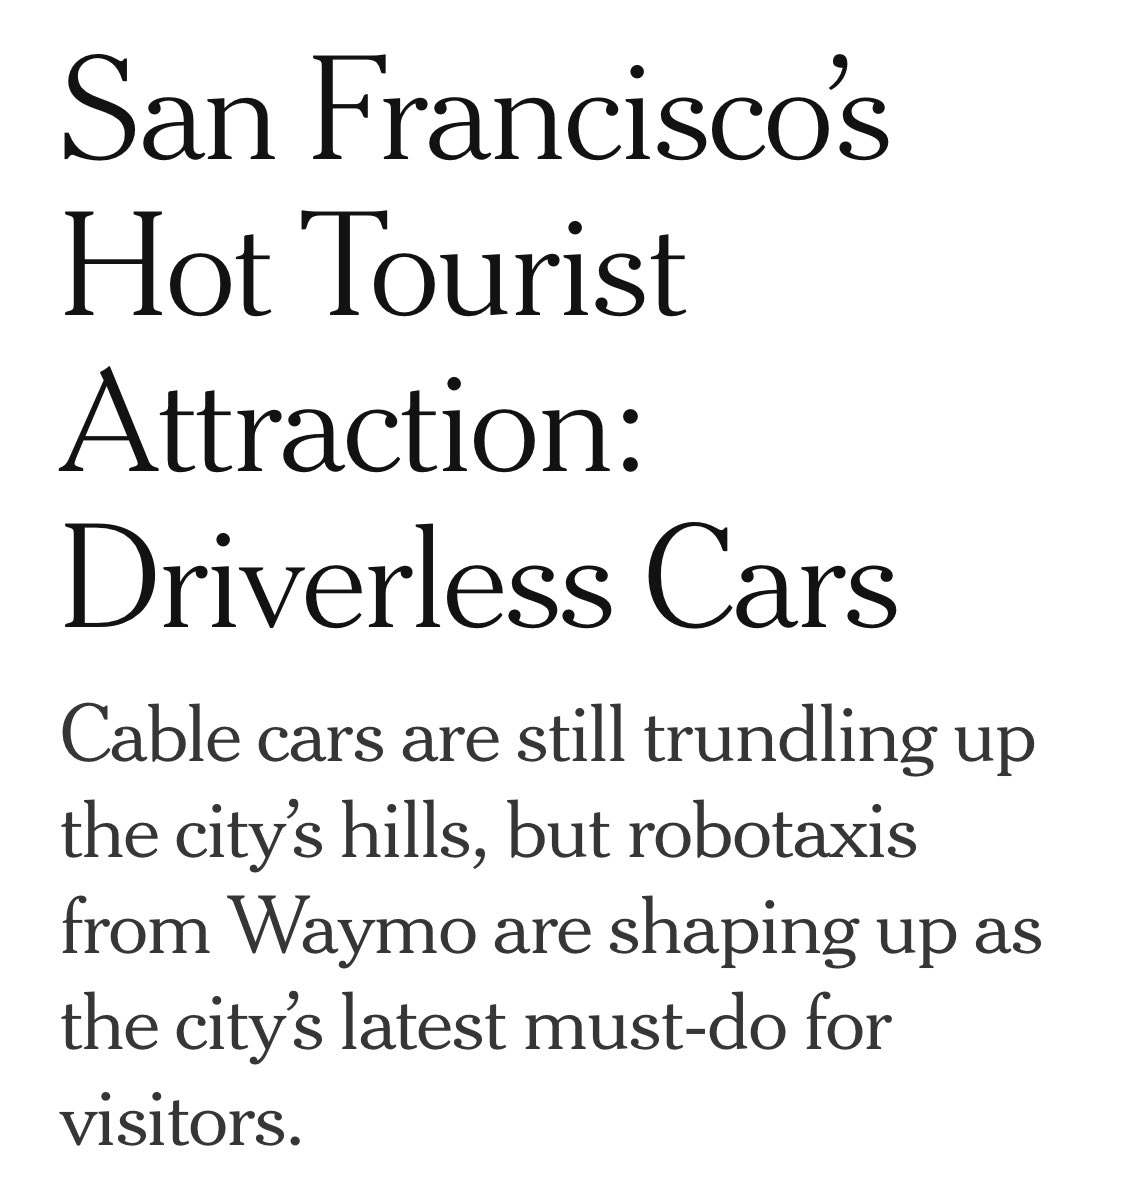 I know this will shock the luddites like Aaron Peskin and the east bay bro who vandalizes them, but actual people actually love self driving vehicles.